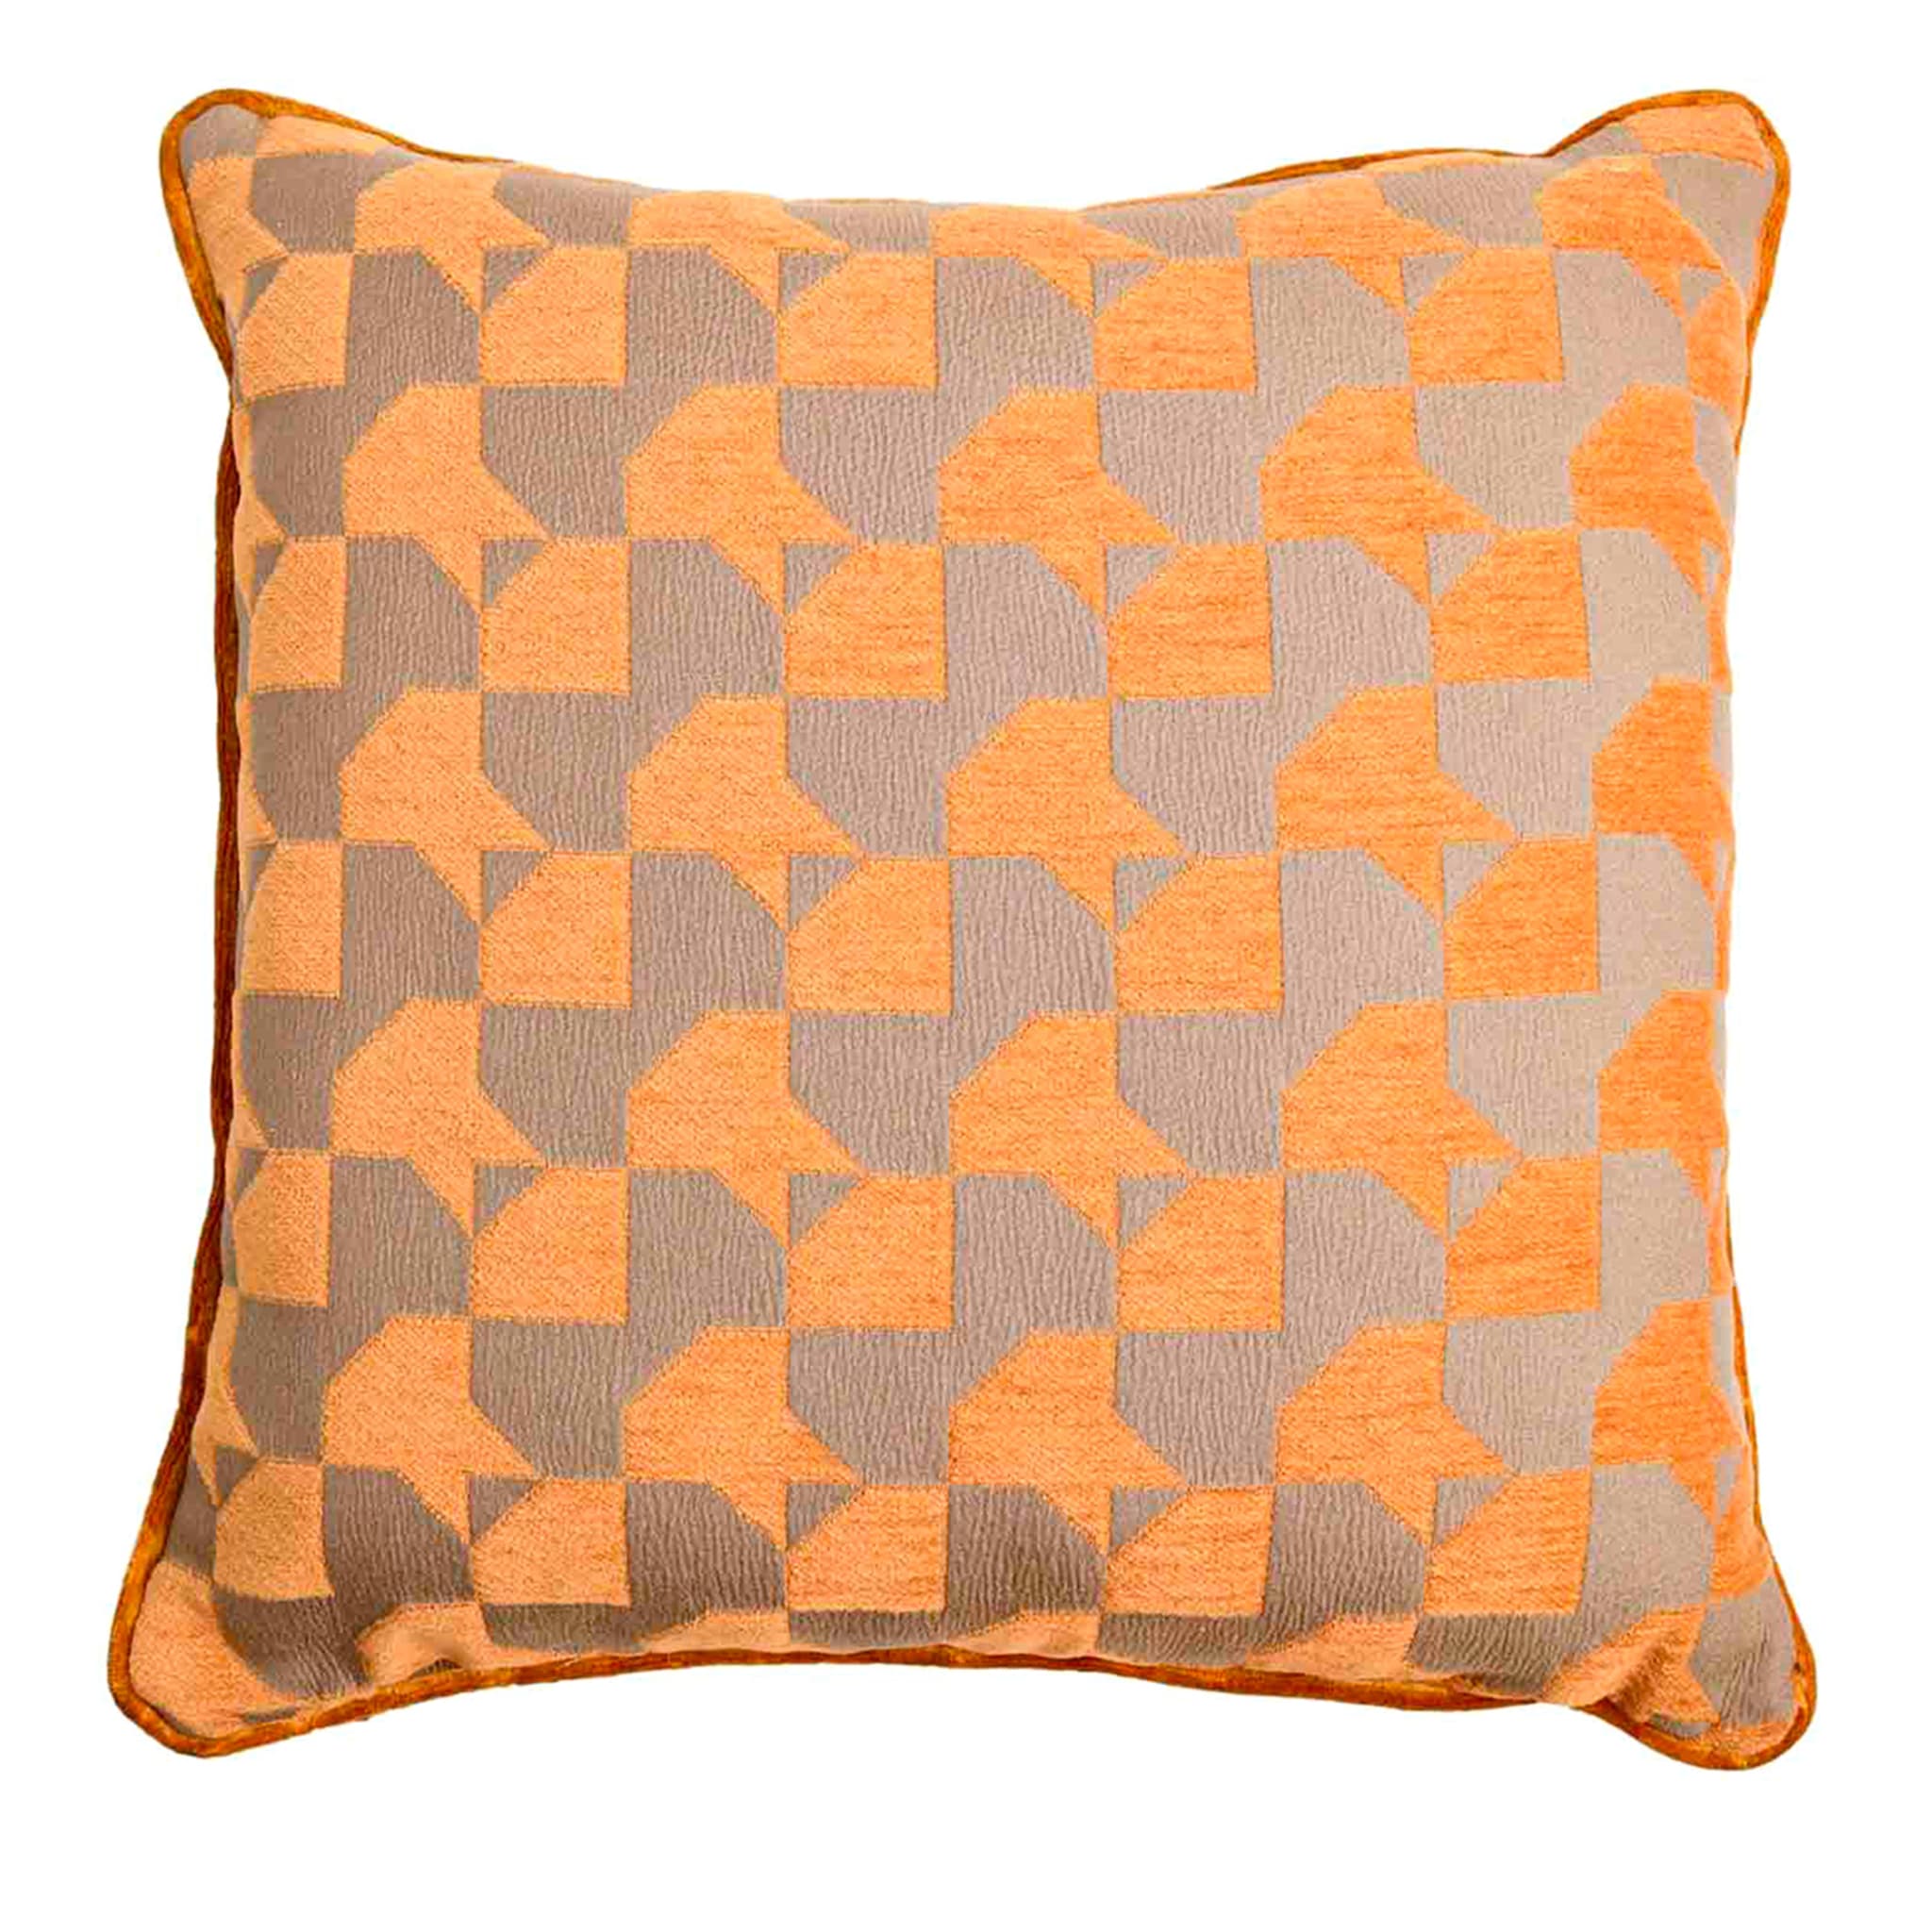 Carrè Houndstooth Orange and White Square Cushion - Main view